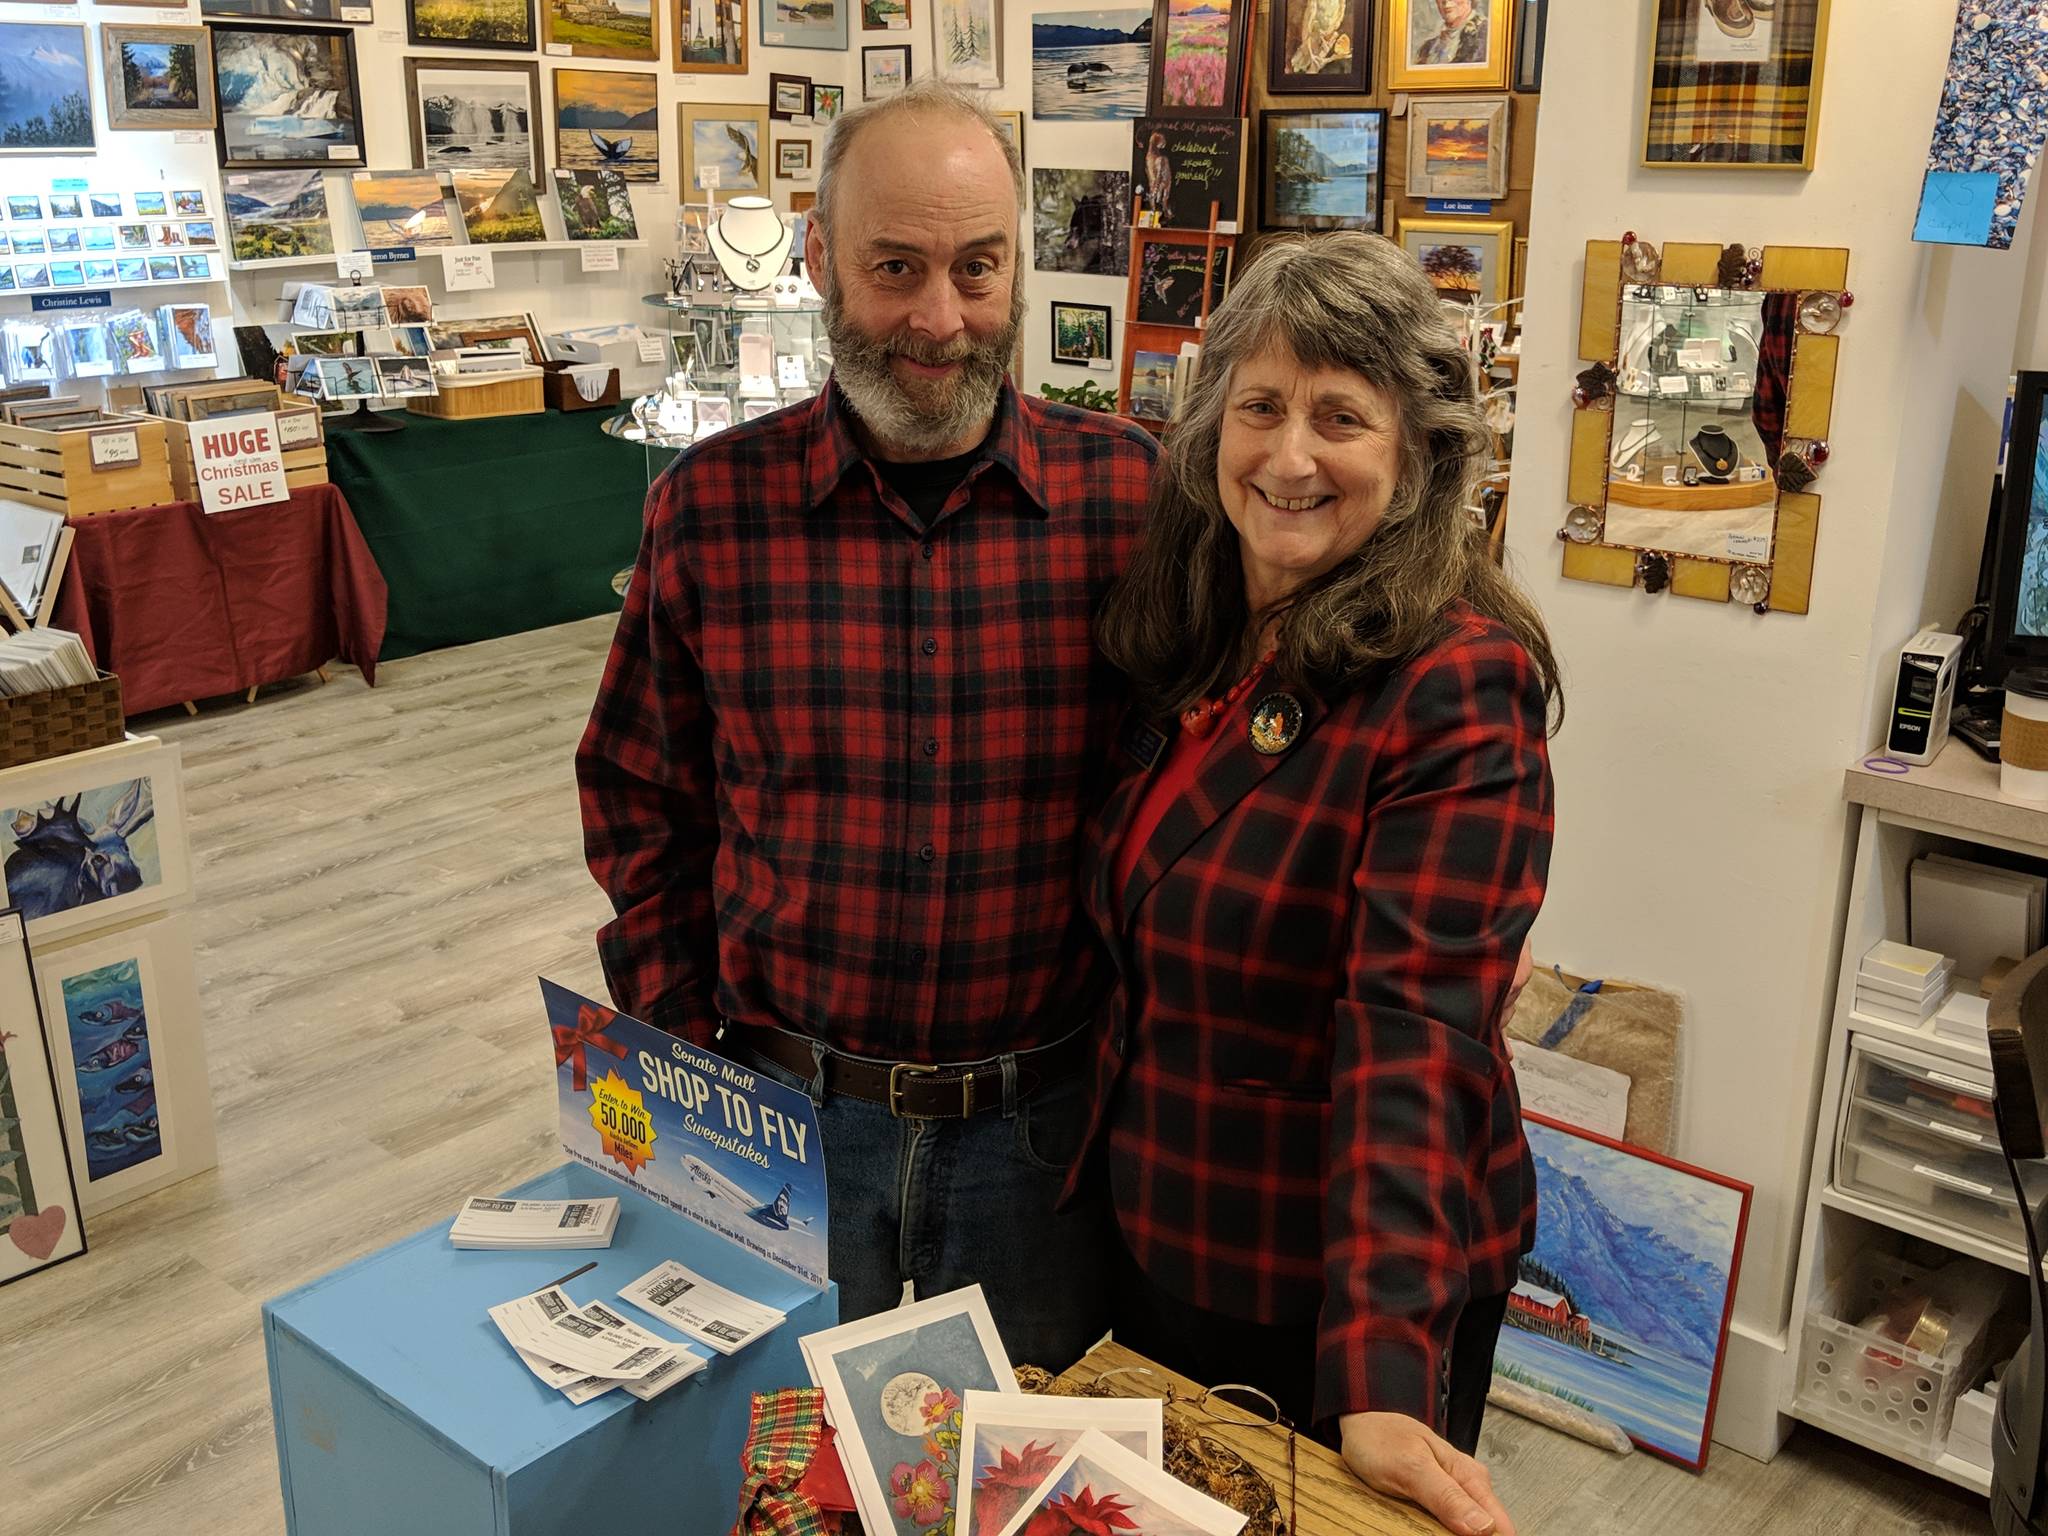 Mark Vinsel and Dianne Anderson, Juneau artists and husband and wife, are planning to retire from Juneau’s professional arts community and eventually move from the area. Here they stand in Juneau Artists Gallery Wednesday, Dec. 19, 2018. (Ben Hohenstatt | Capital City Weekly)